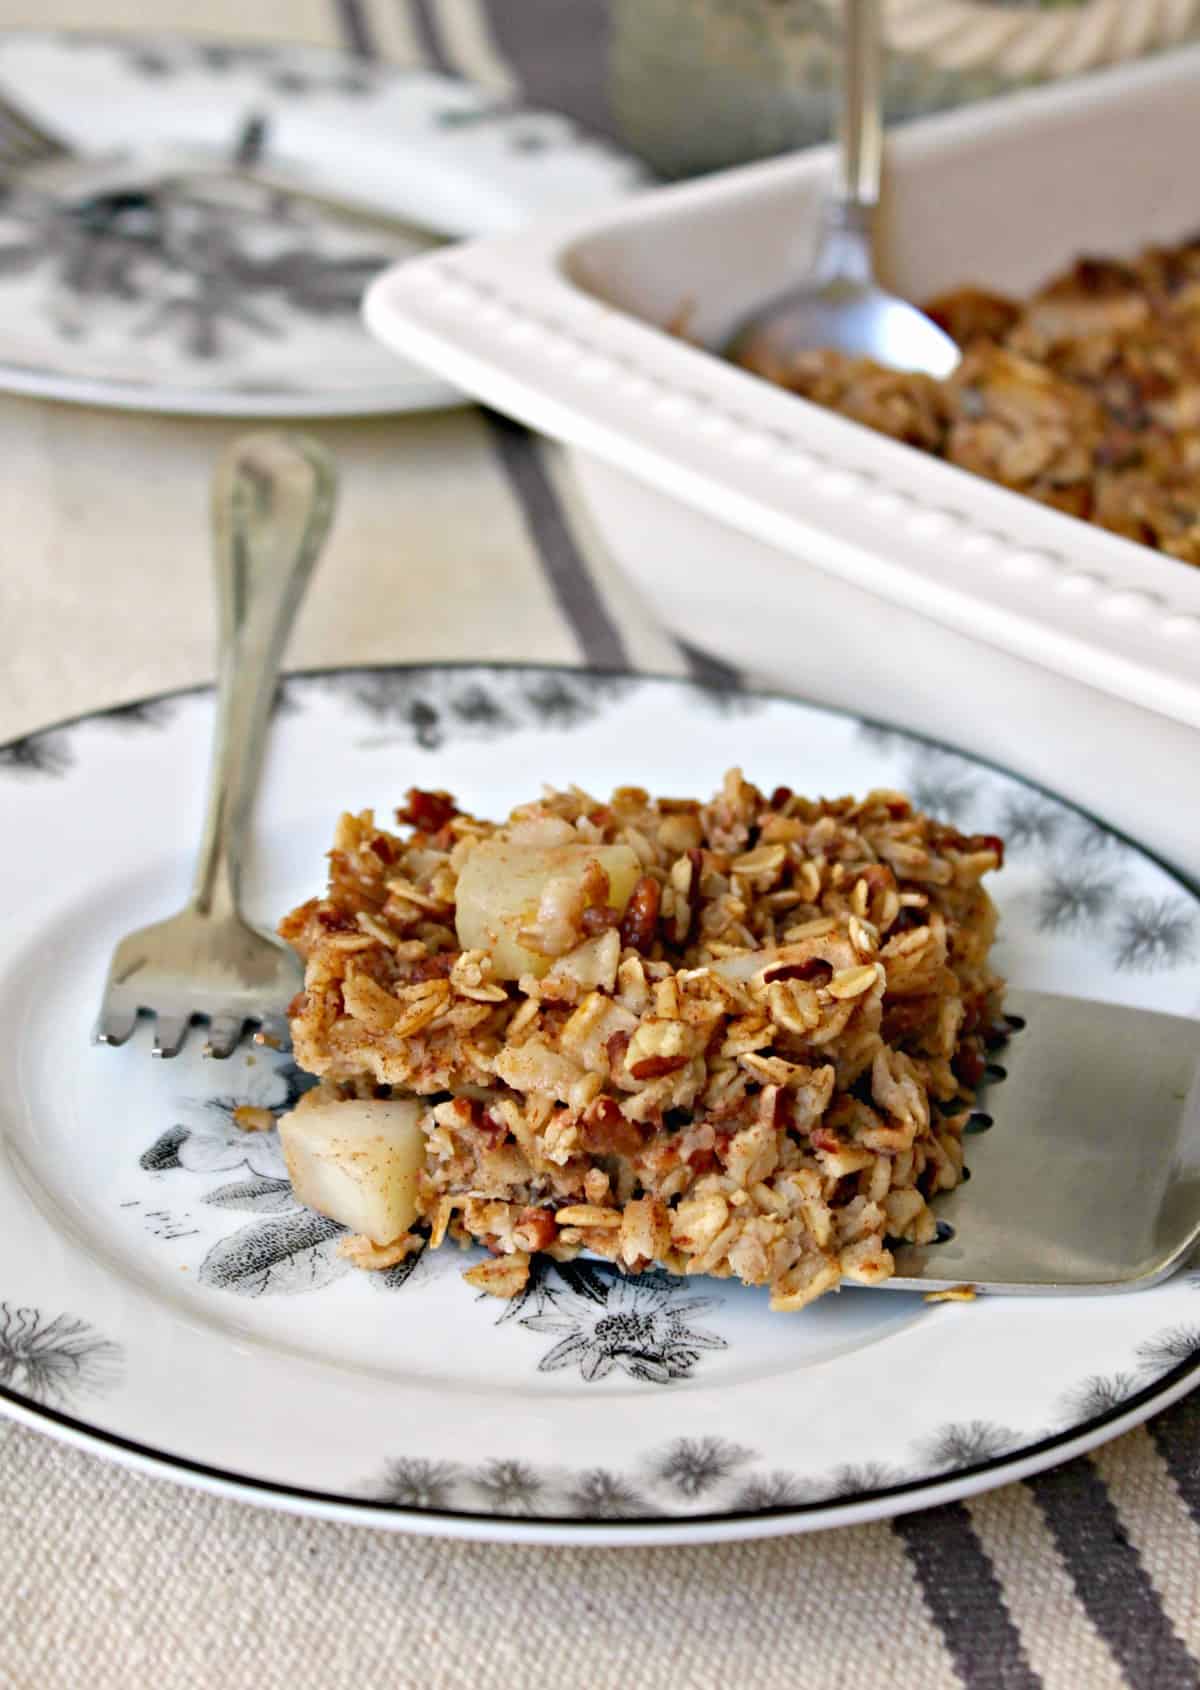 Spiced Pear Oatmeal Bake! Resolutions for starting the day on a more nutritious note will be easy to keep with this healthy baked oatmeal recipe. Made with hearty oats, juicy pears and warming spices, this easy, make-ahead breakfast will be one you look forward to daily! 